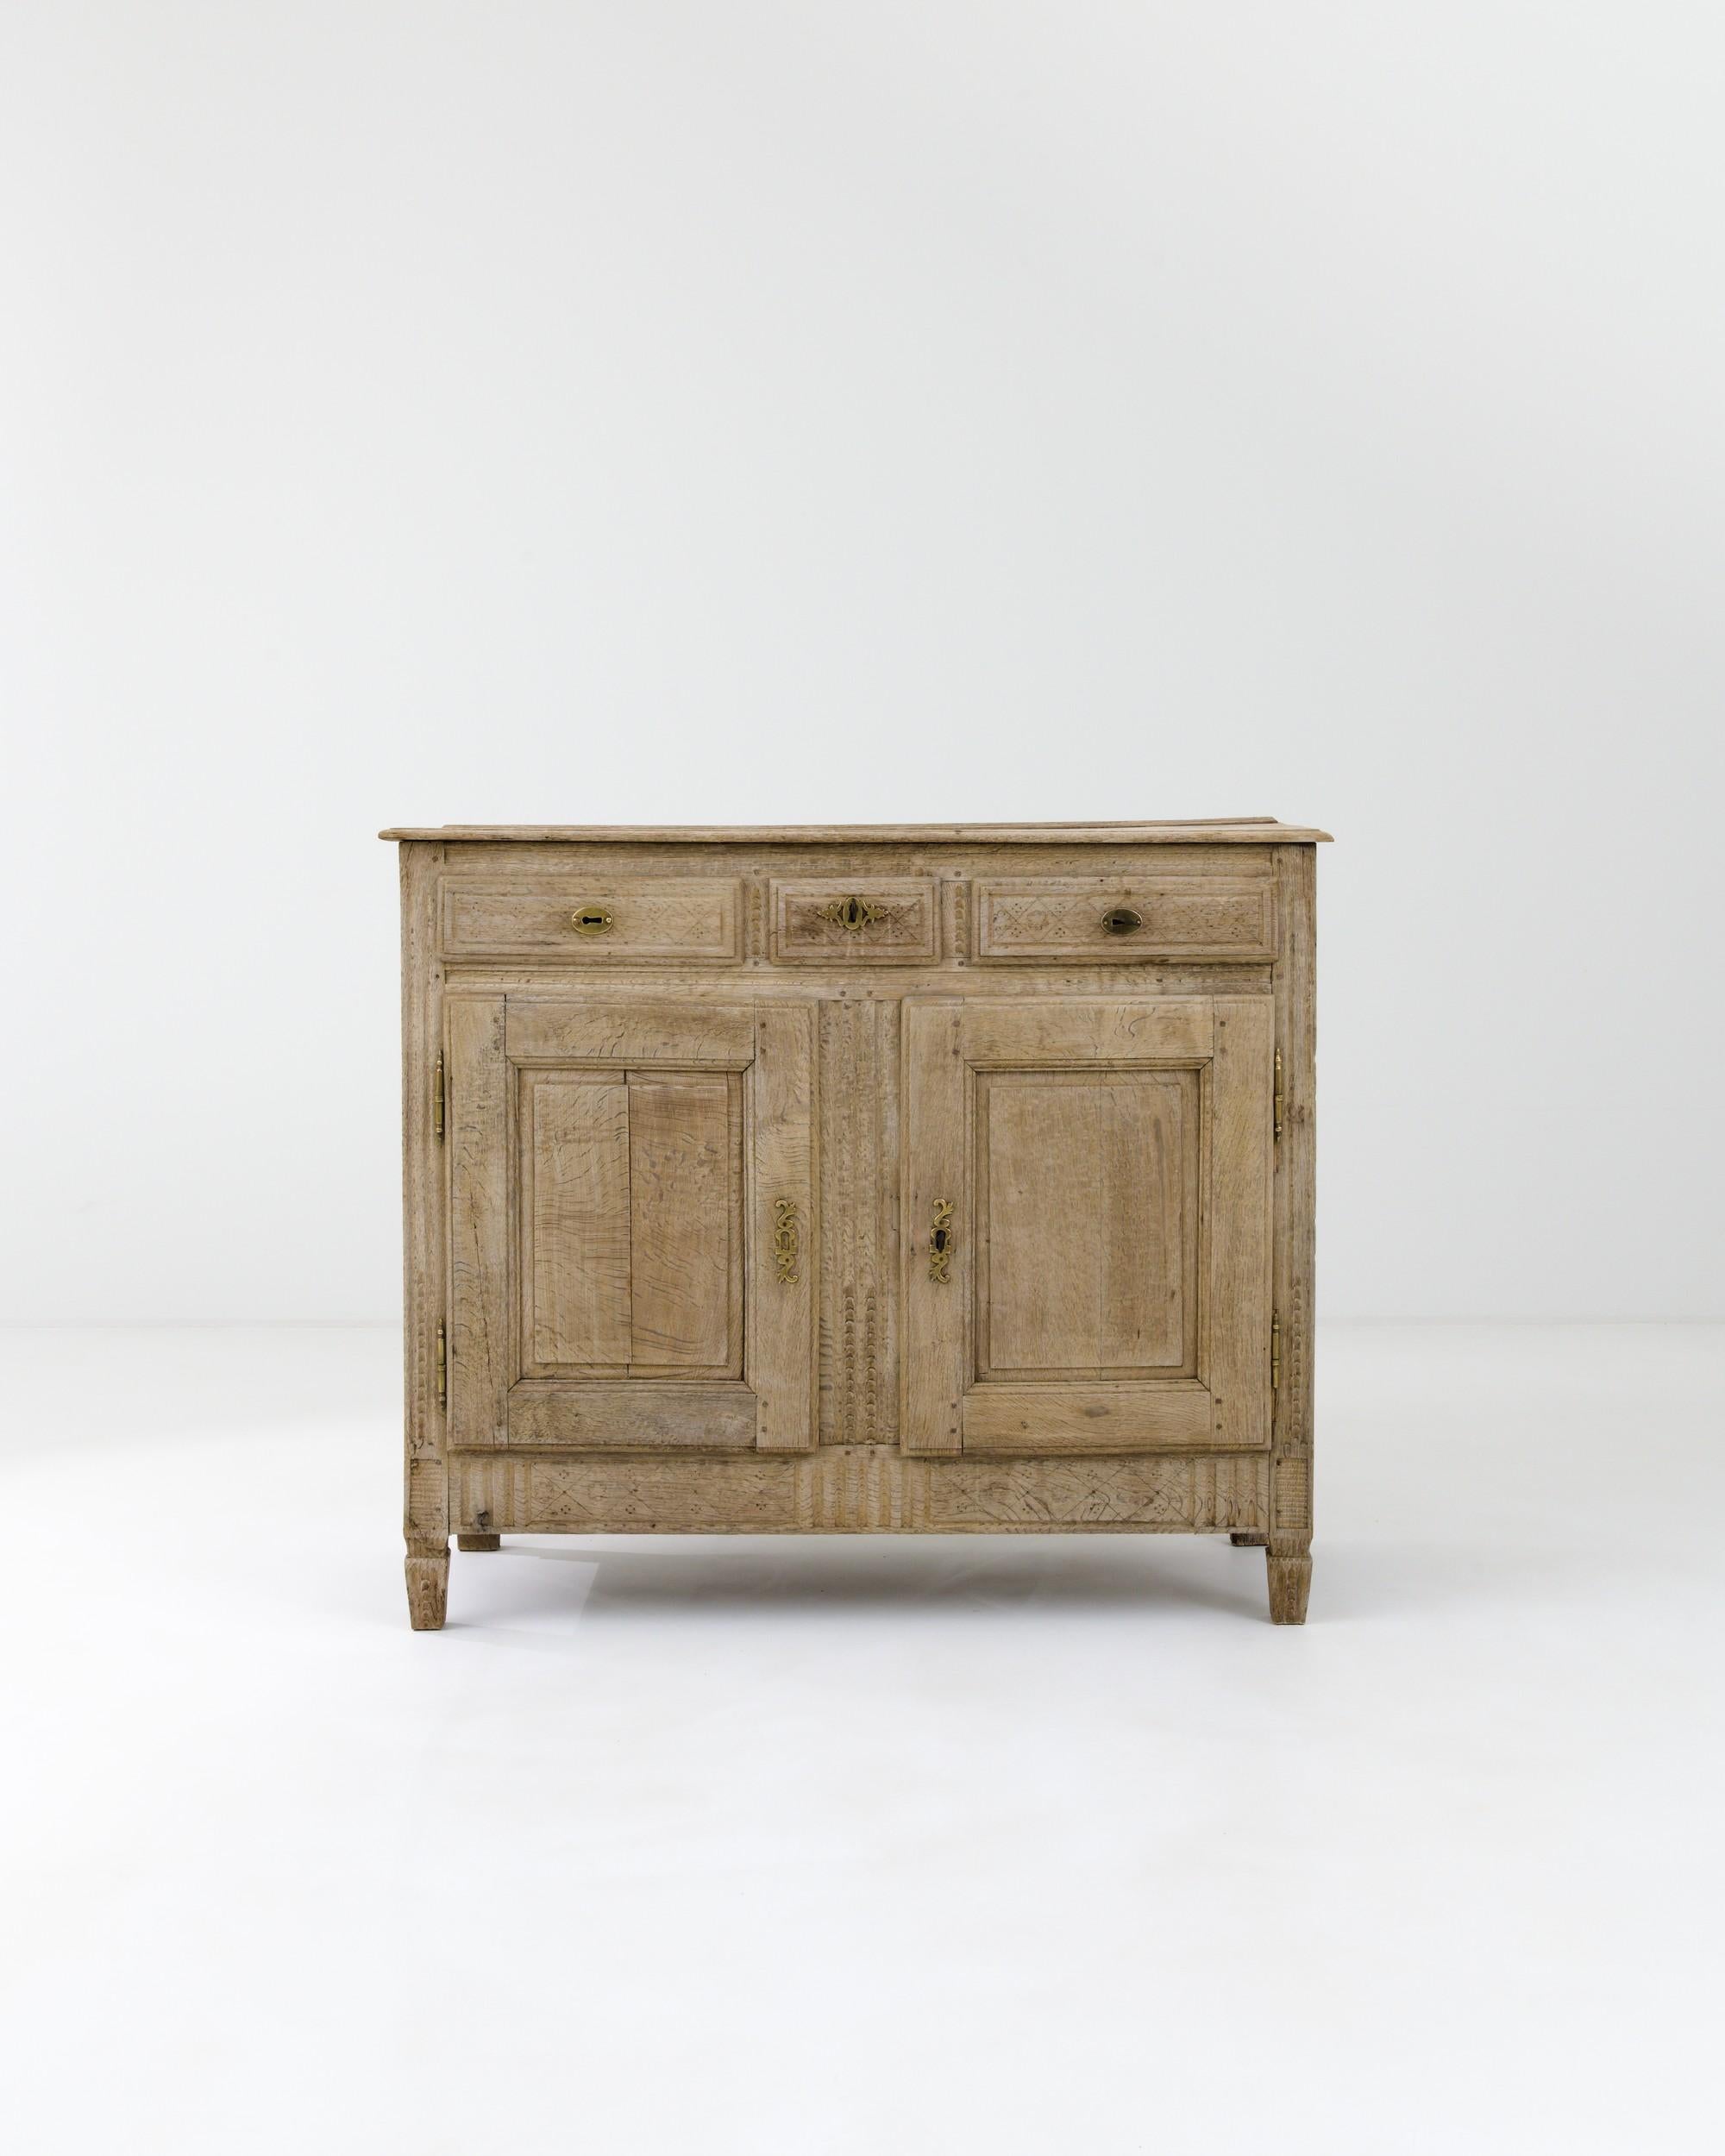 This 19th-century French buffet, handcrafted from fine European oak, flaunts intricate patterns of natural grain combined with subtle carvings decorating the apron. The ornate brass lock pieces on the panel doors of the lower compartments, along